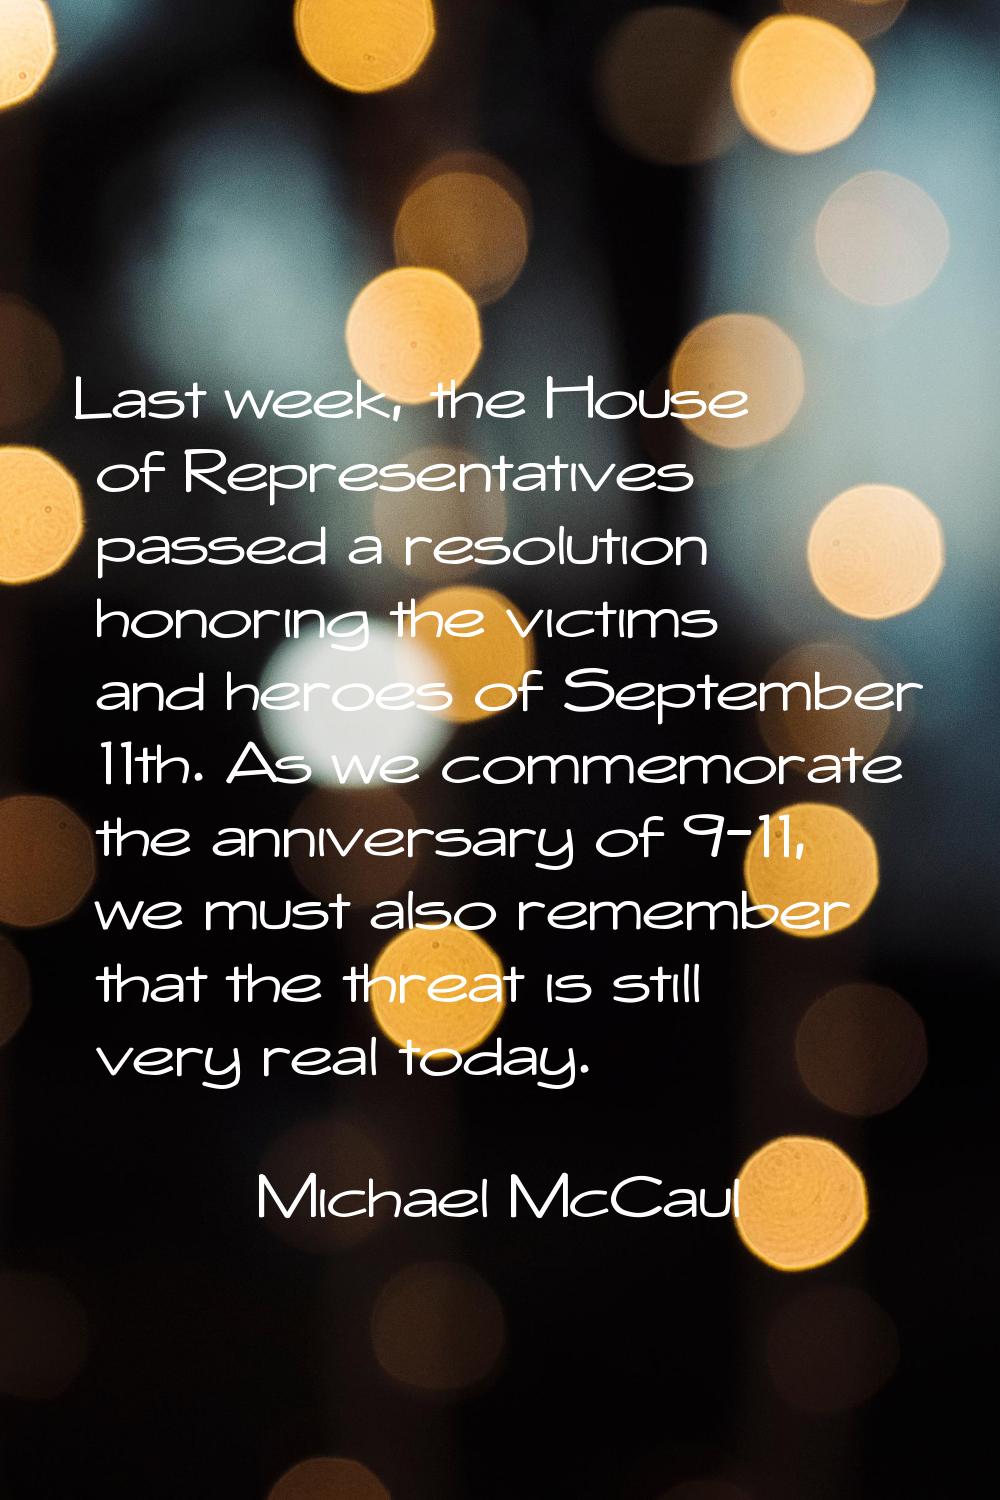 Last week, the House of Representatives passed a resolution honoring the victims and heroes of Sept